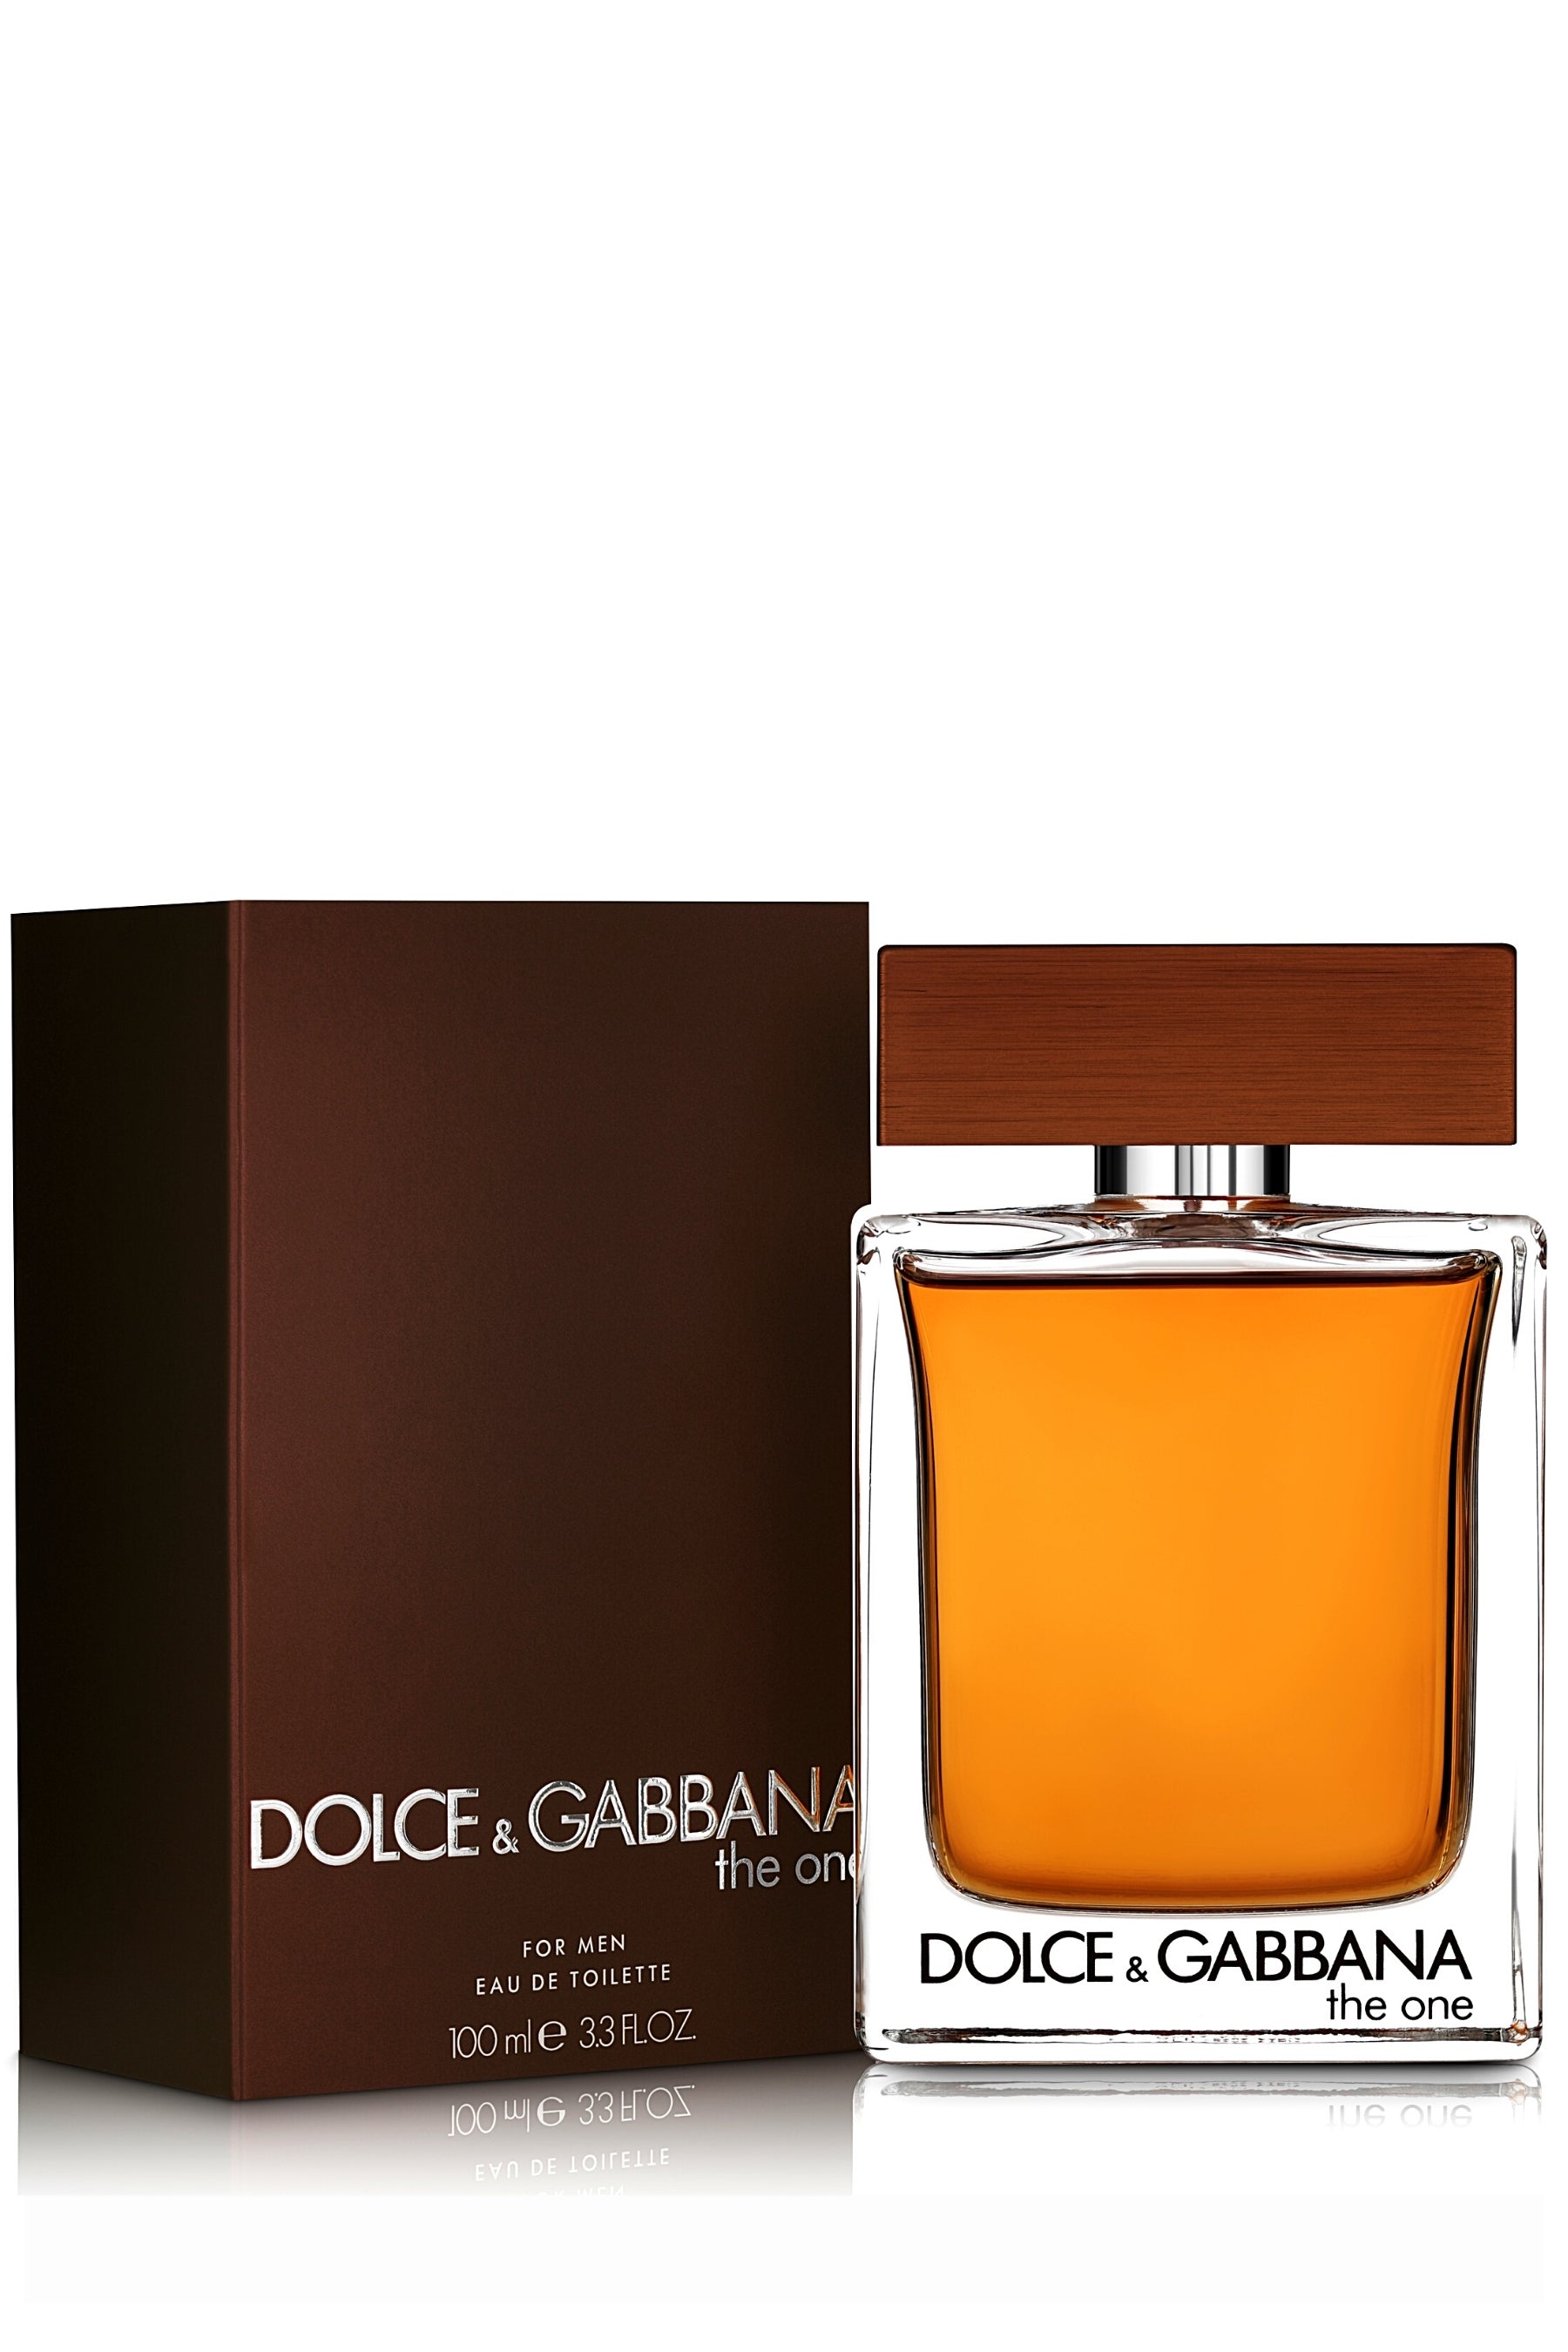 Colonia Dolce & Gabbana The One Edt 150ml hombre